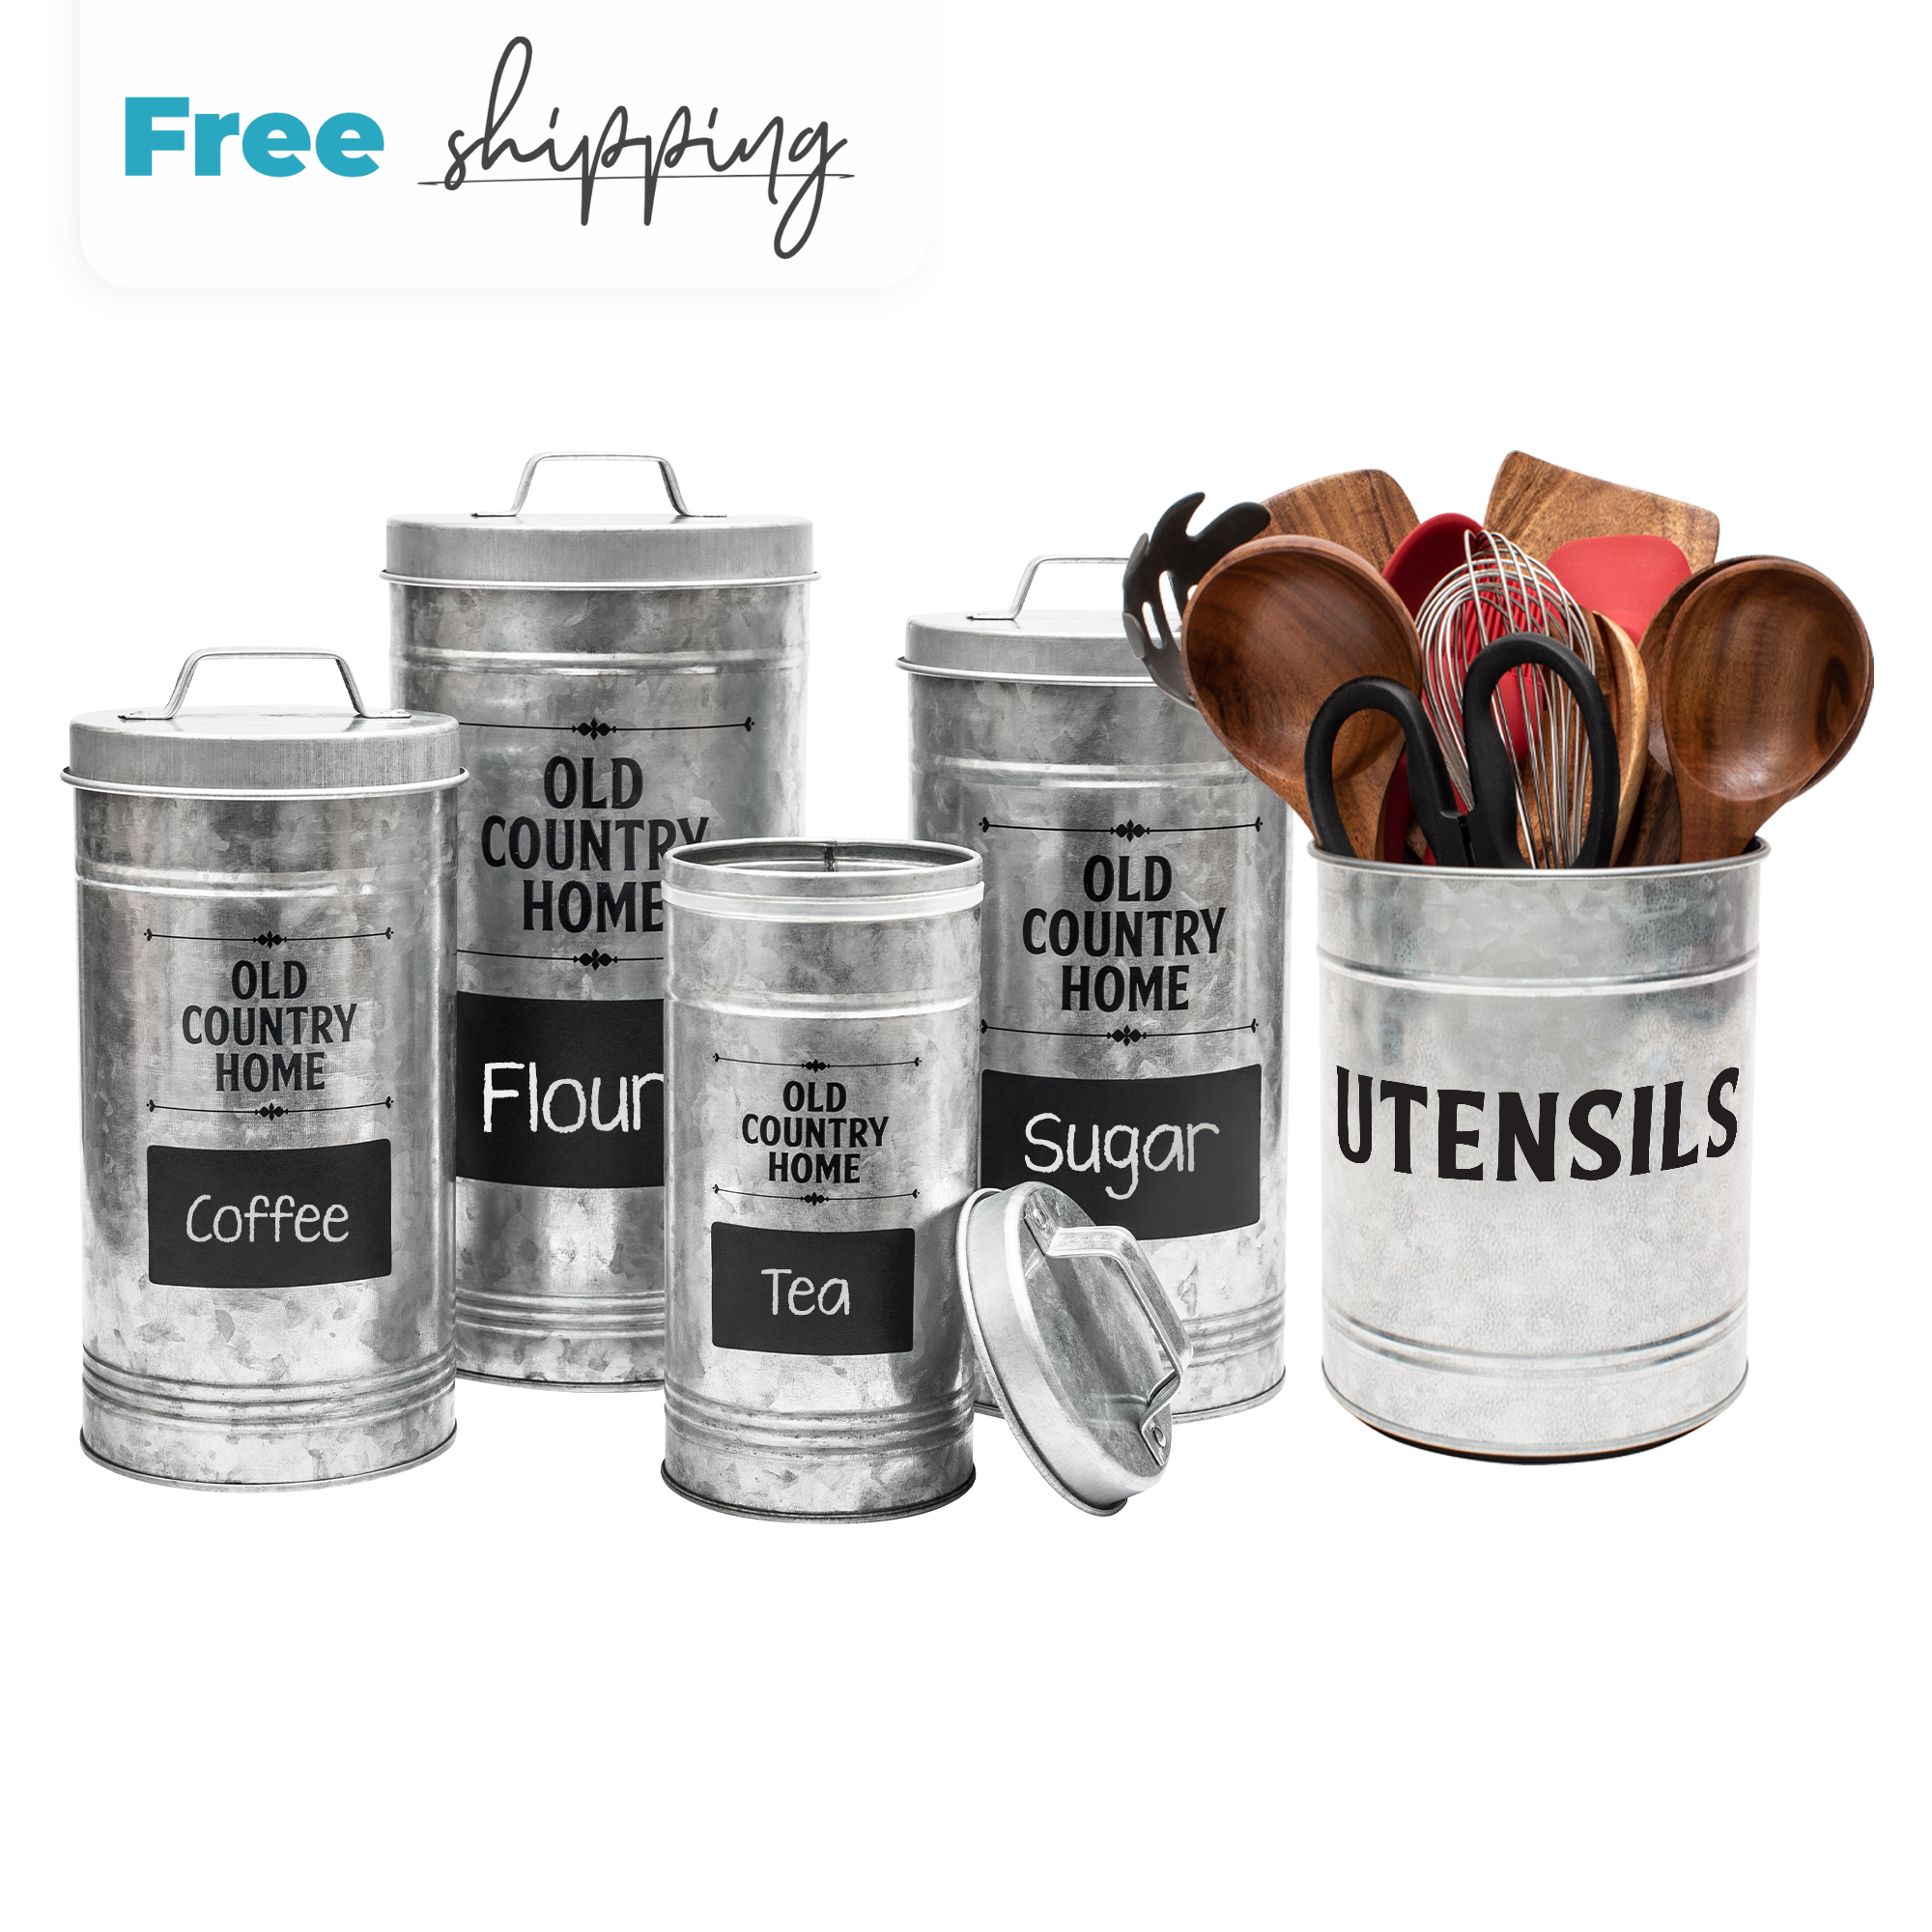 Farmhouse Storage Set by Saratoga Home - Galvanized Utensil Holder & Set of 4 Canisters with Labels & Marker